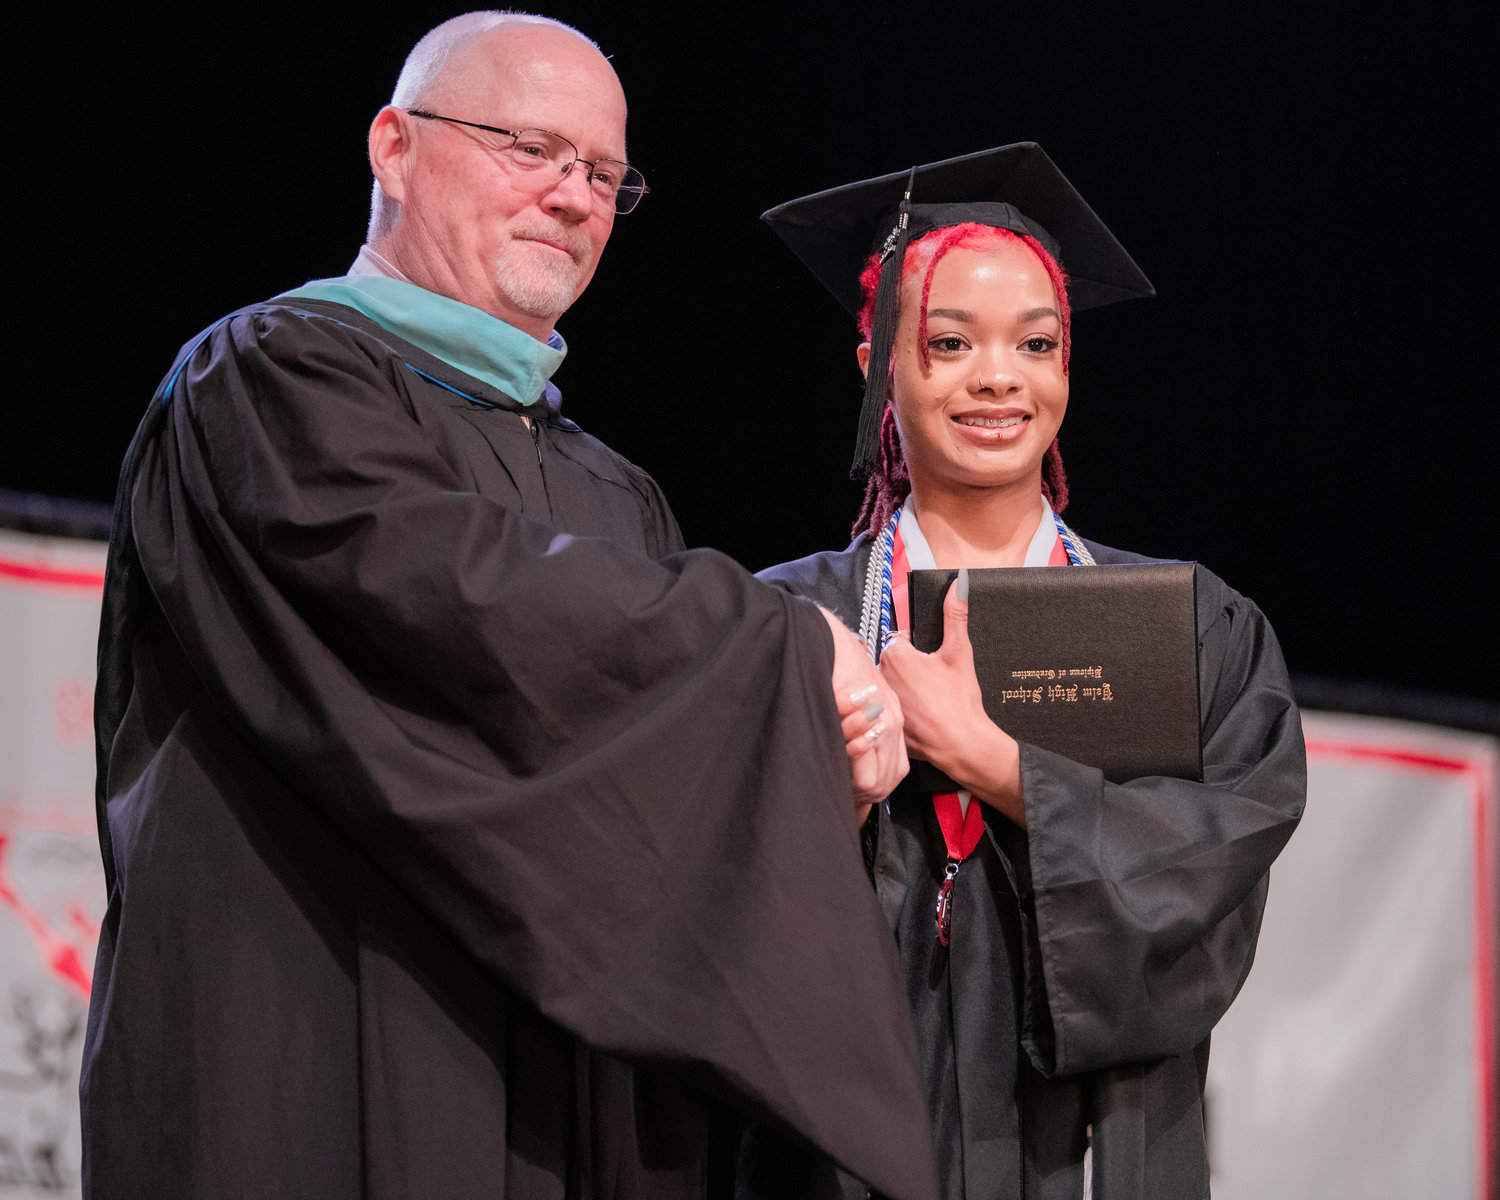 The Yelm High School class graduated during a ceremony at the Tacoma Dome on June 16.